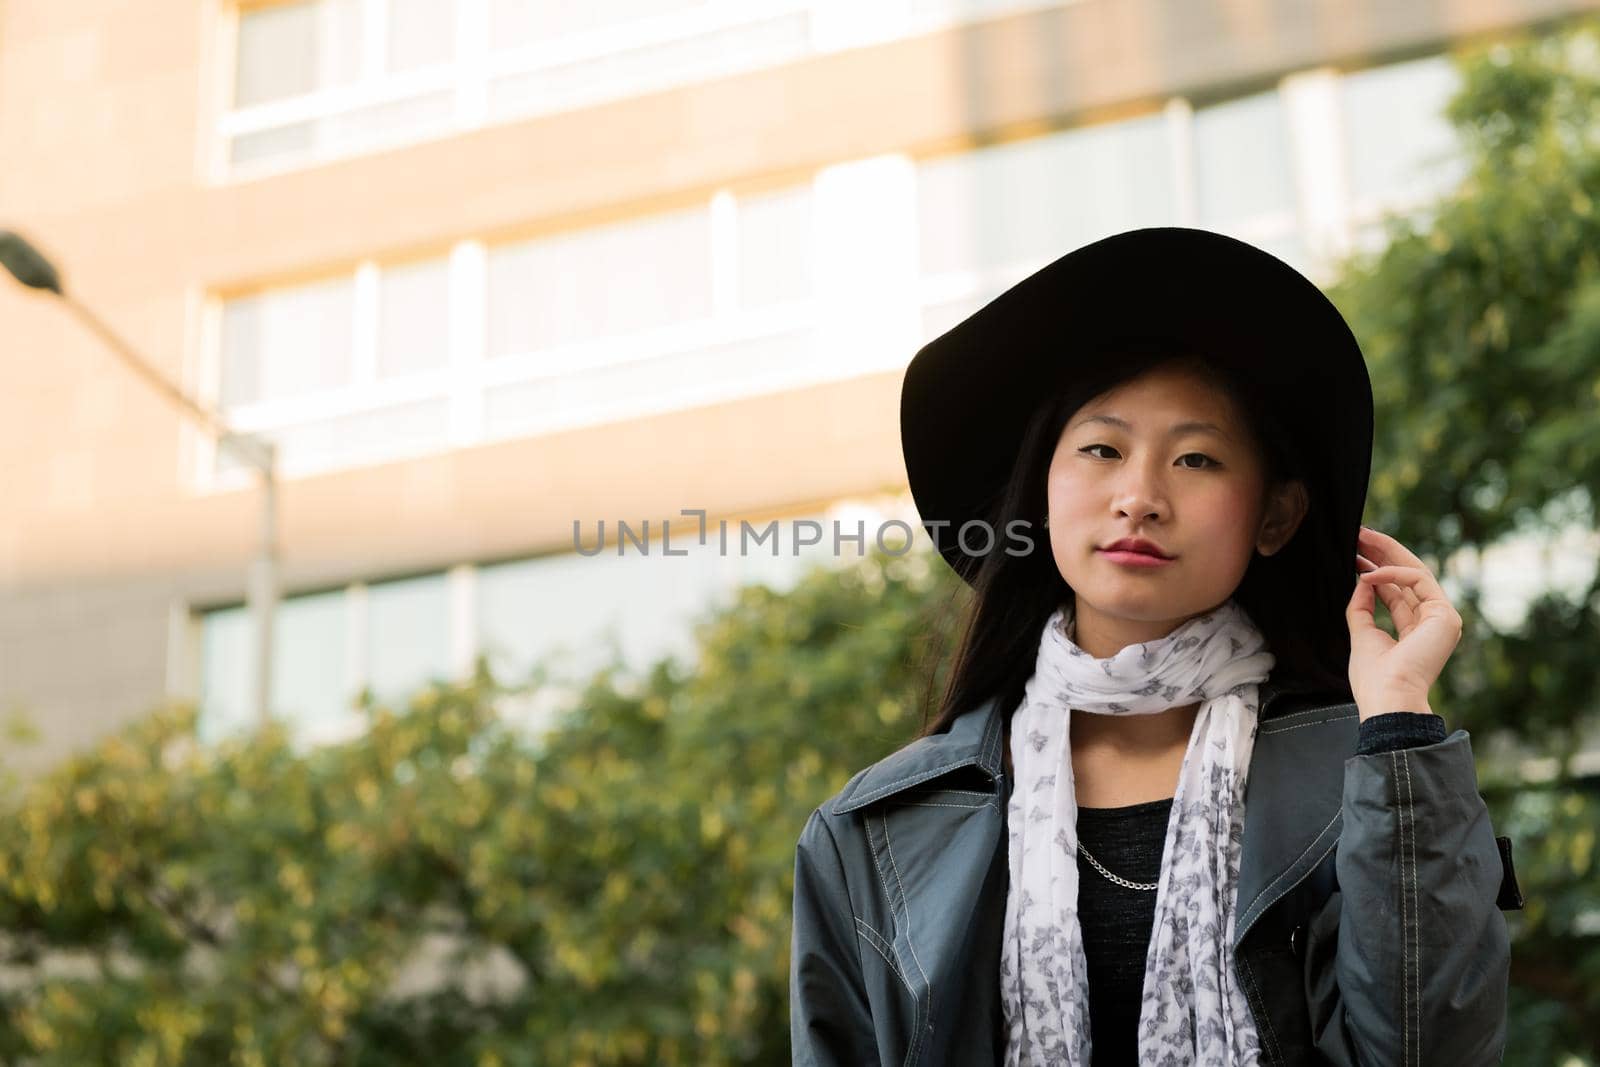 portrait of a classy asian woman with hat and trench coat in the city, concept of elegance and urban lifestyle, copyspace for text